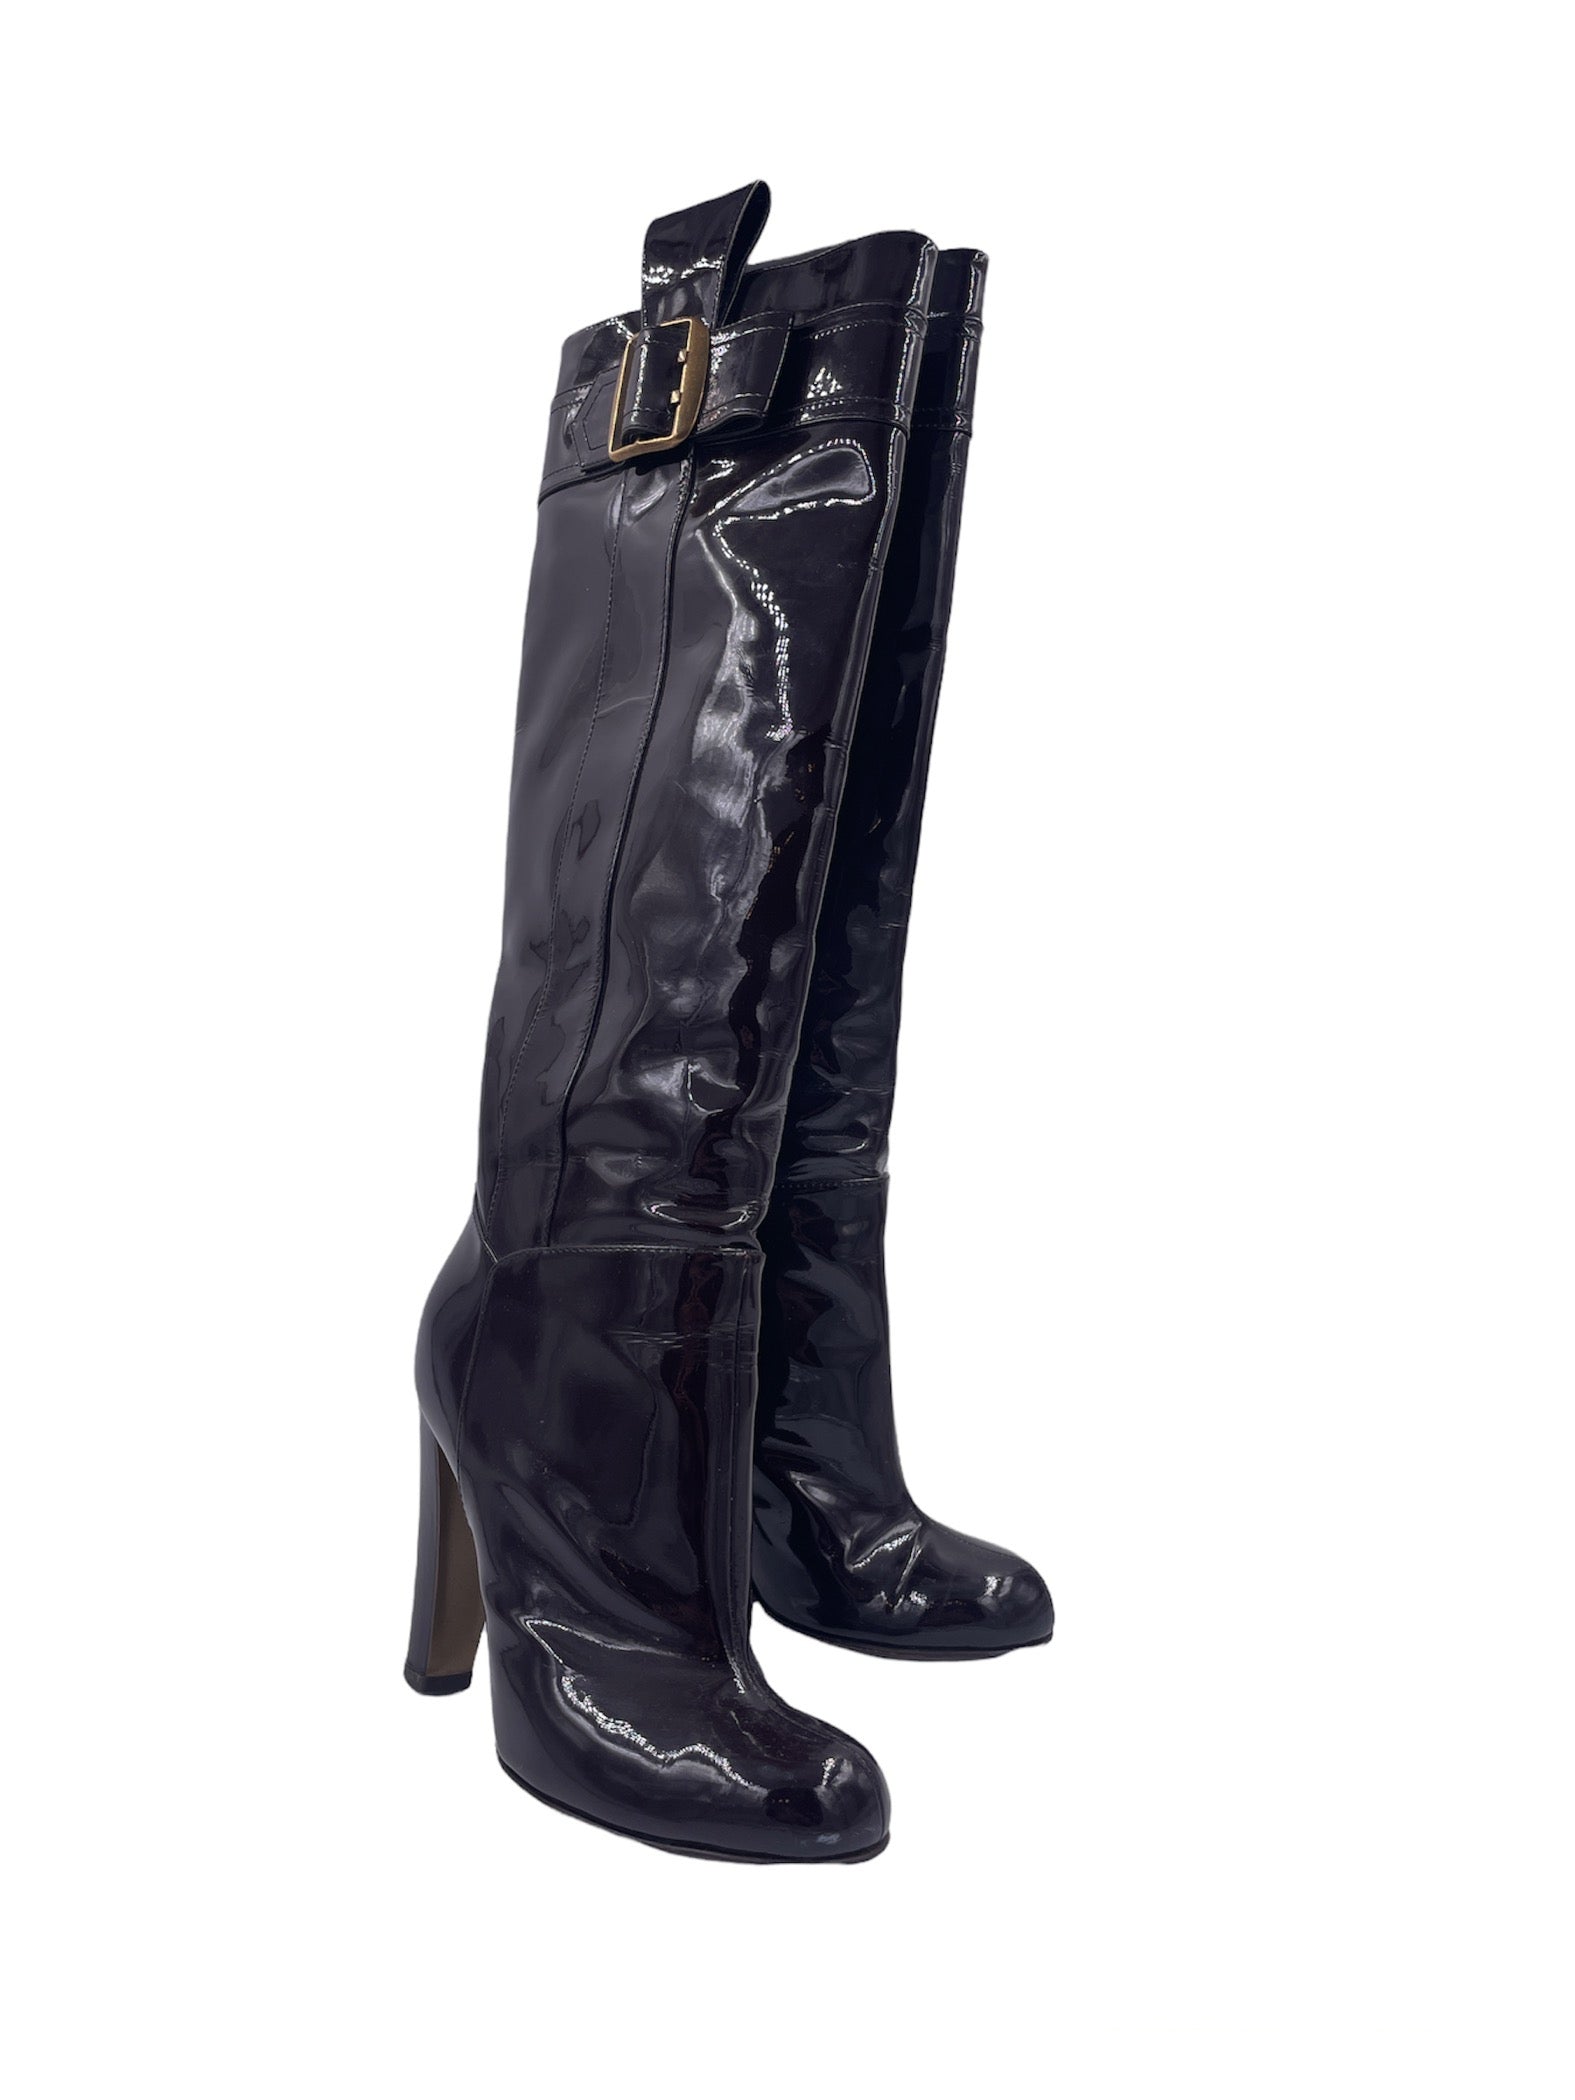 Dolce & Gabanna Patent Leather Heel Boot